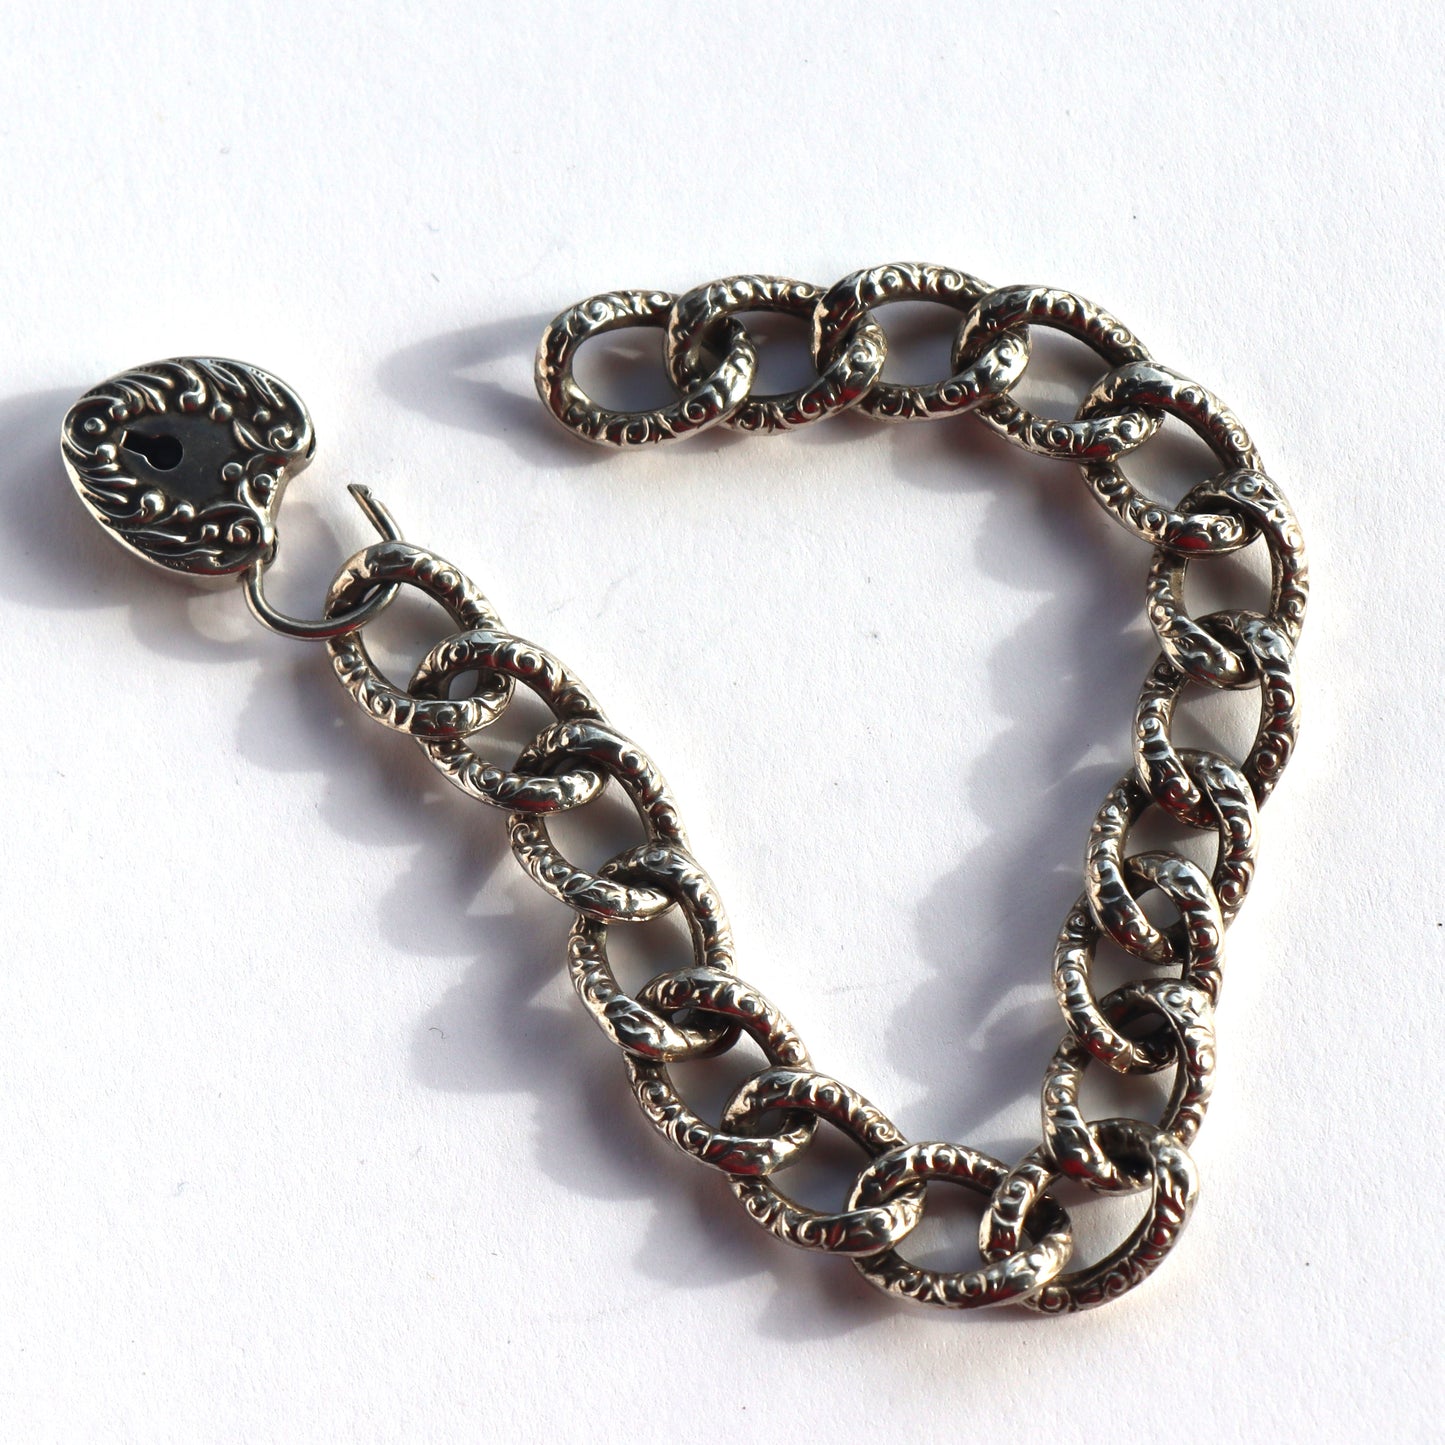 Victorian Sterling Silver Curb Chain Link Bracelet Heart Lock Clasp c1900